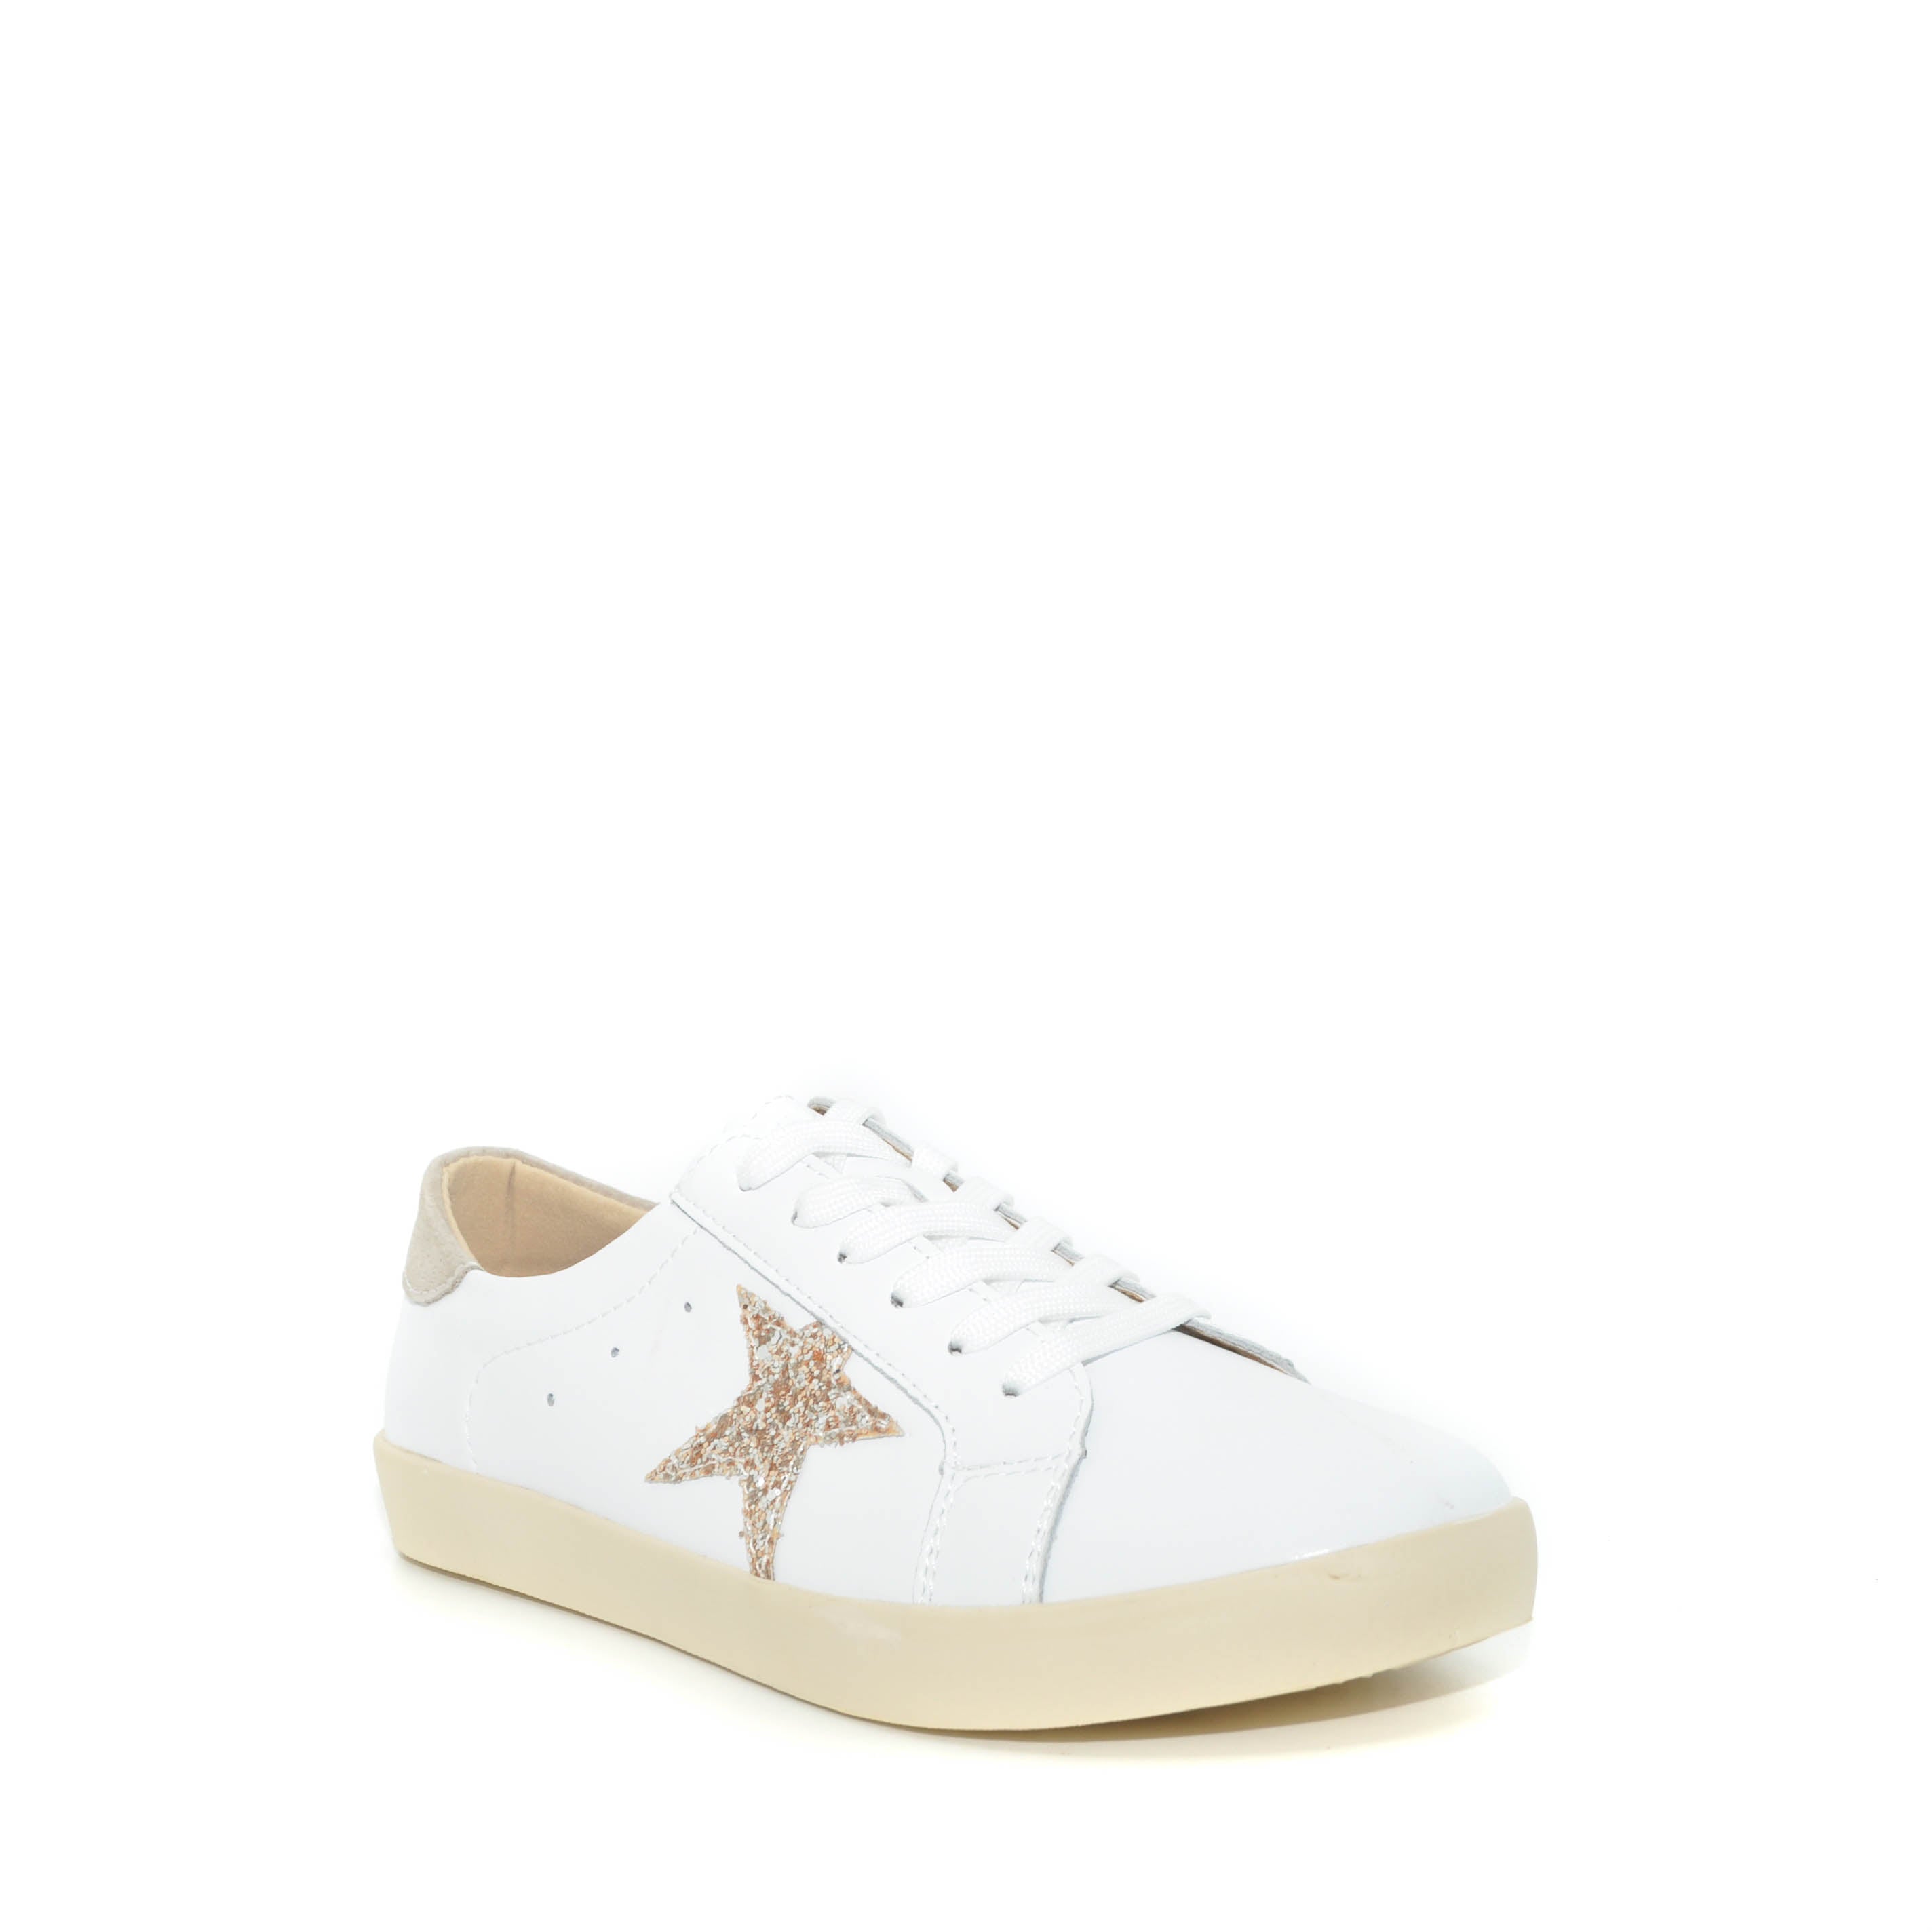 white flat shoes for women